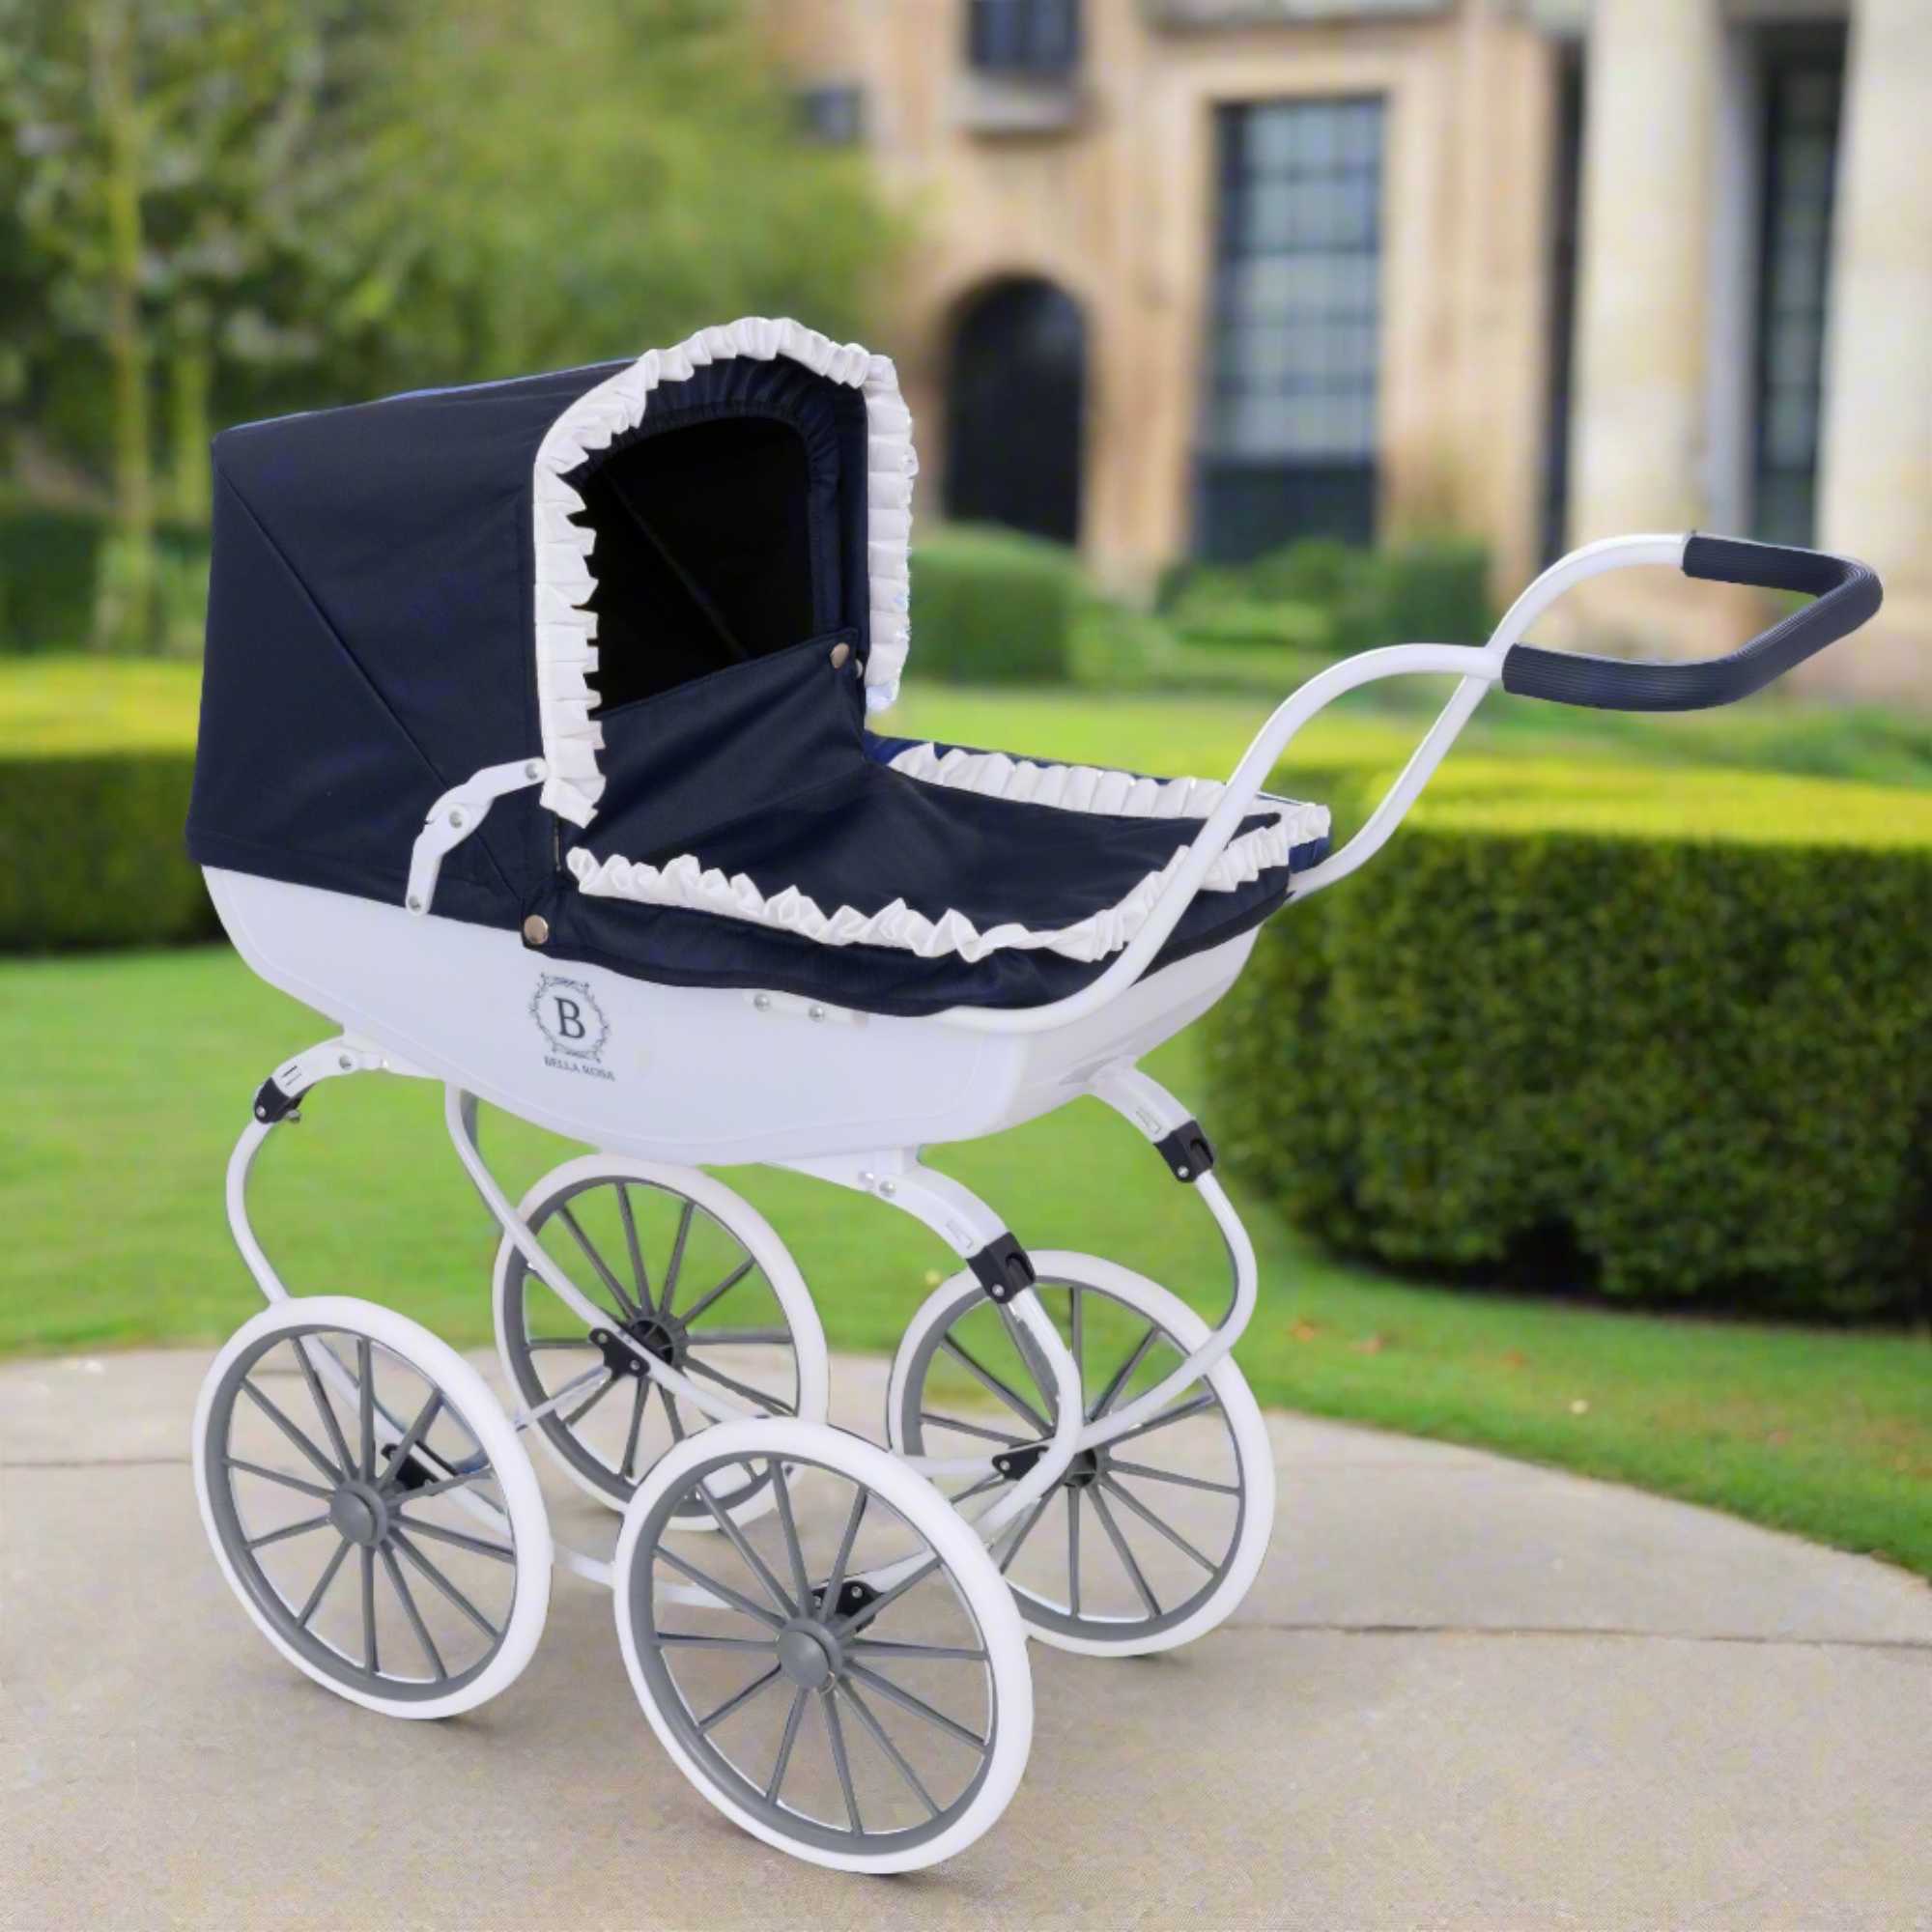 Bella Rosa Windsor Dolls Carriage Pram - Navy & White - Elegant navy and white pram designed for dolls, combining classic style with functionality to enhance imaginative play for children.